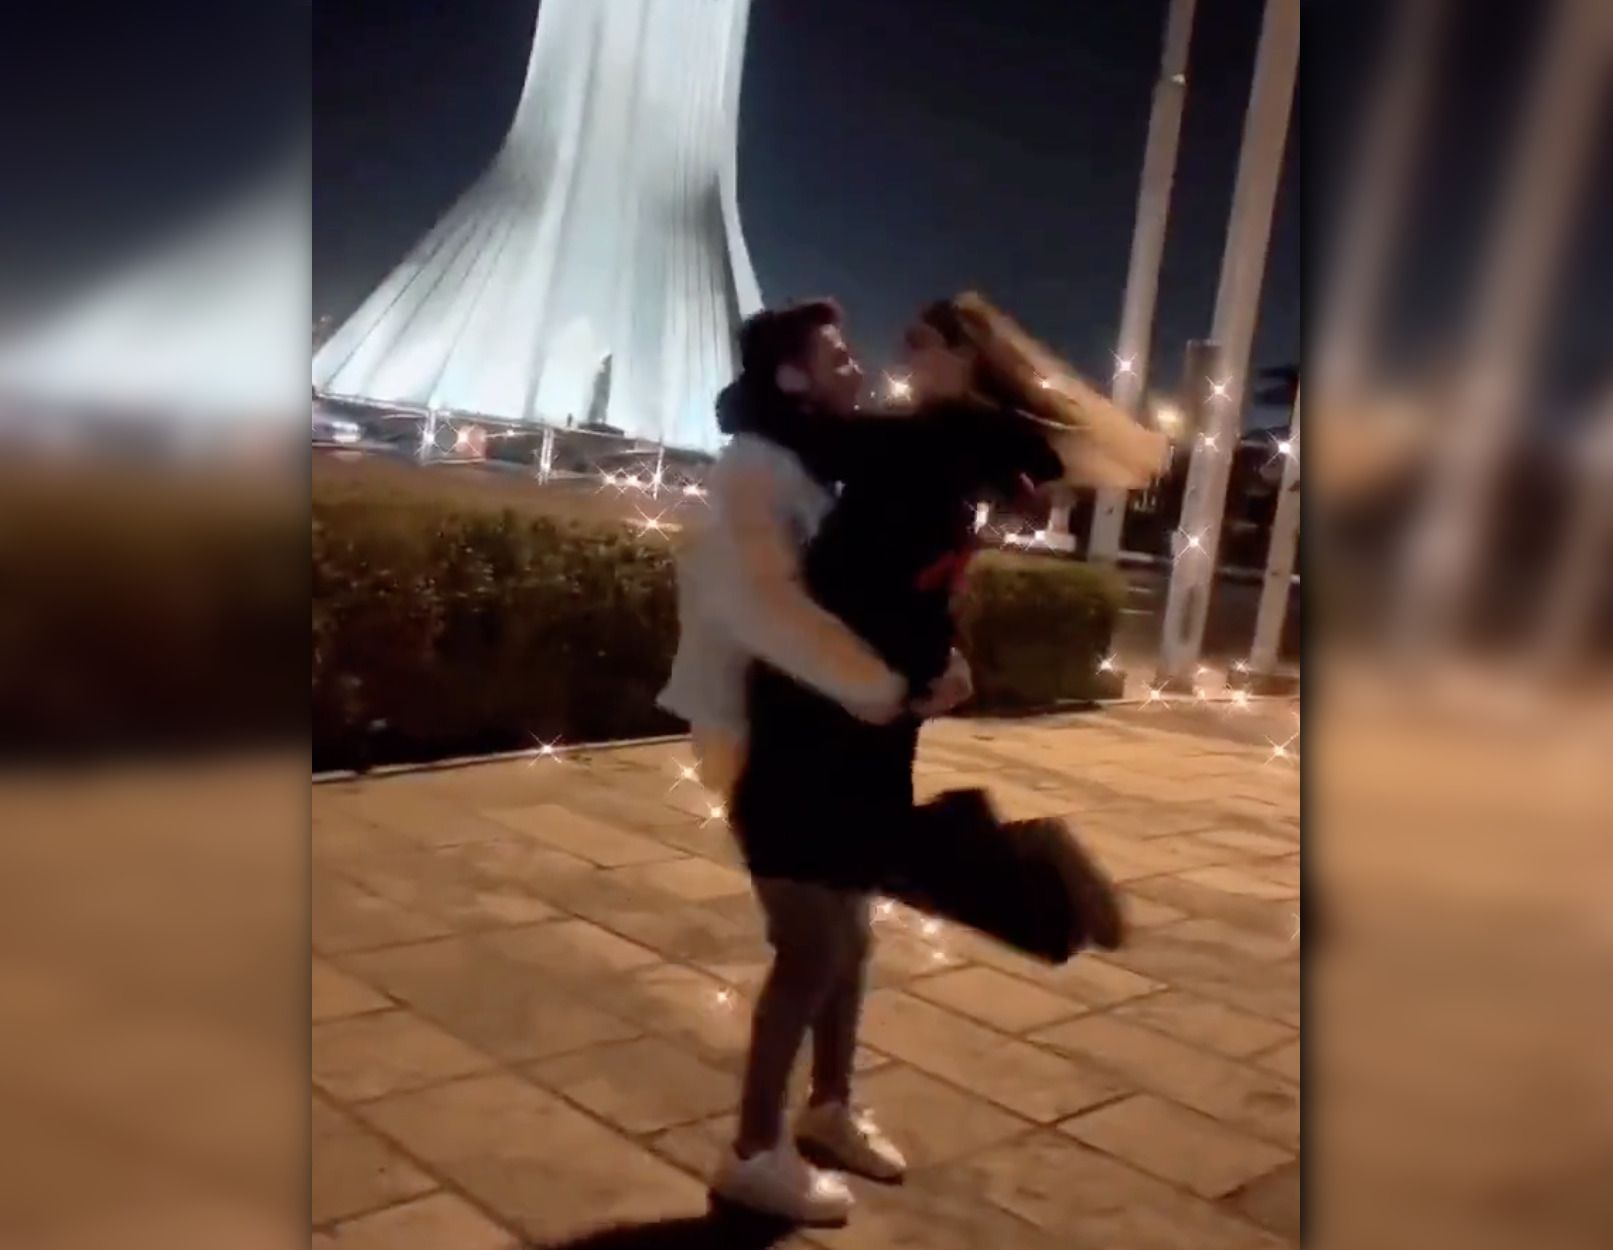 Iranian blogger couple sentenced to 10 years in prison for dancing in a video